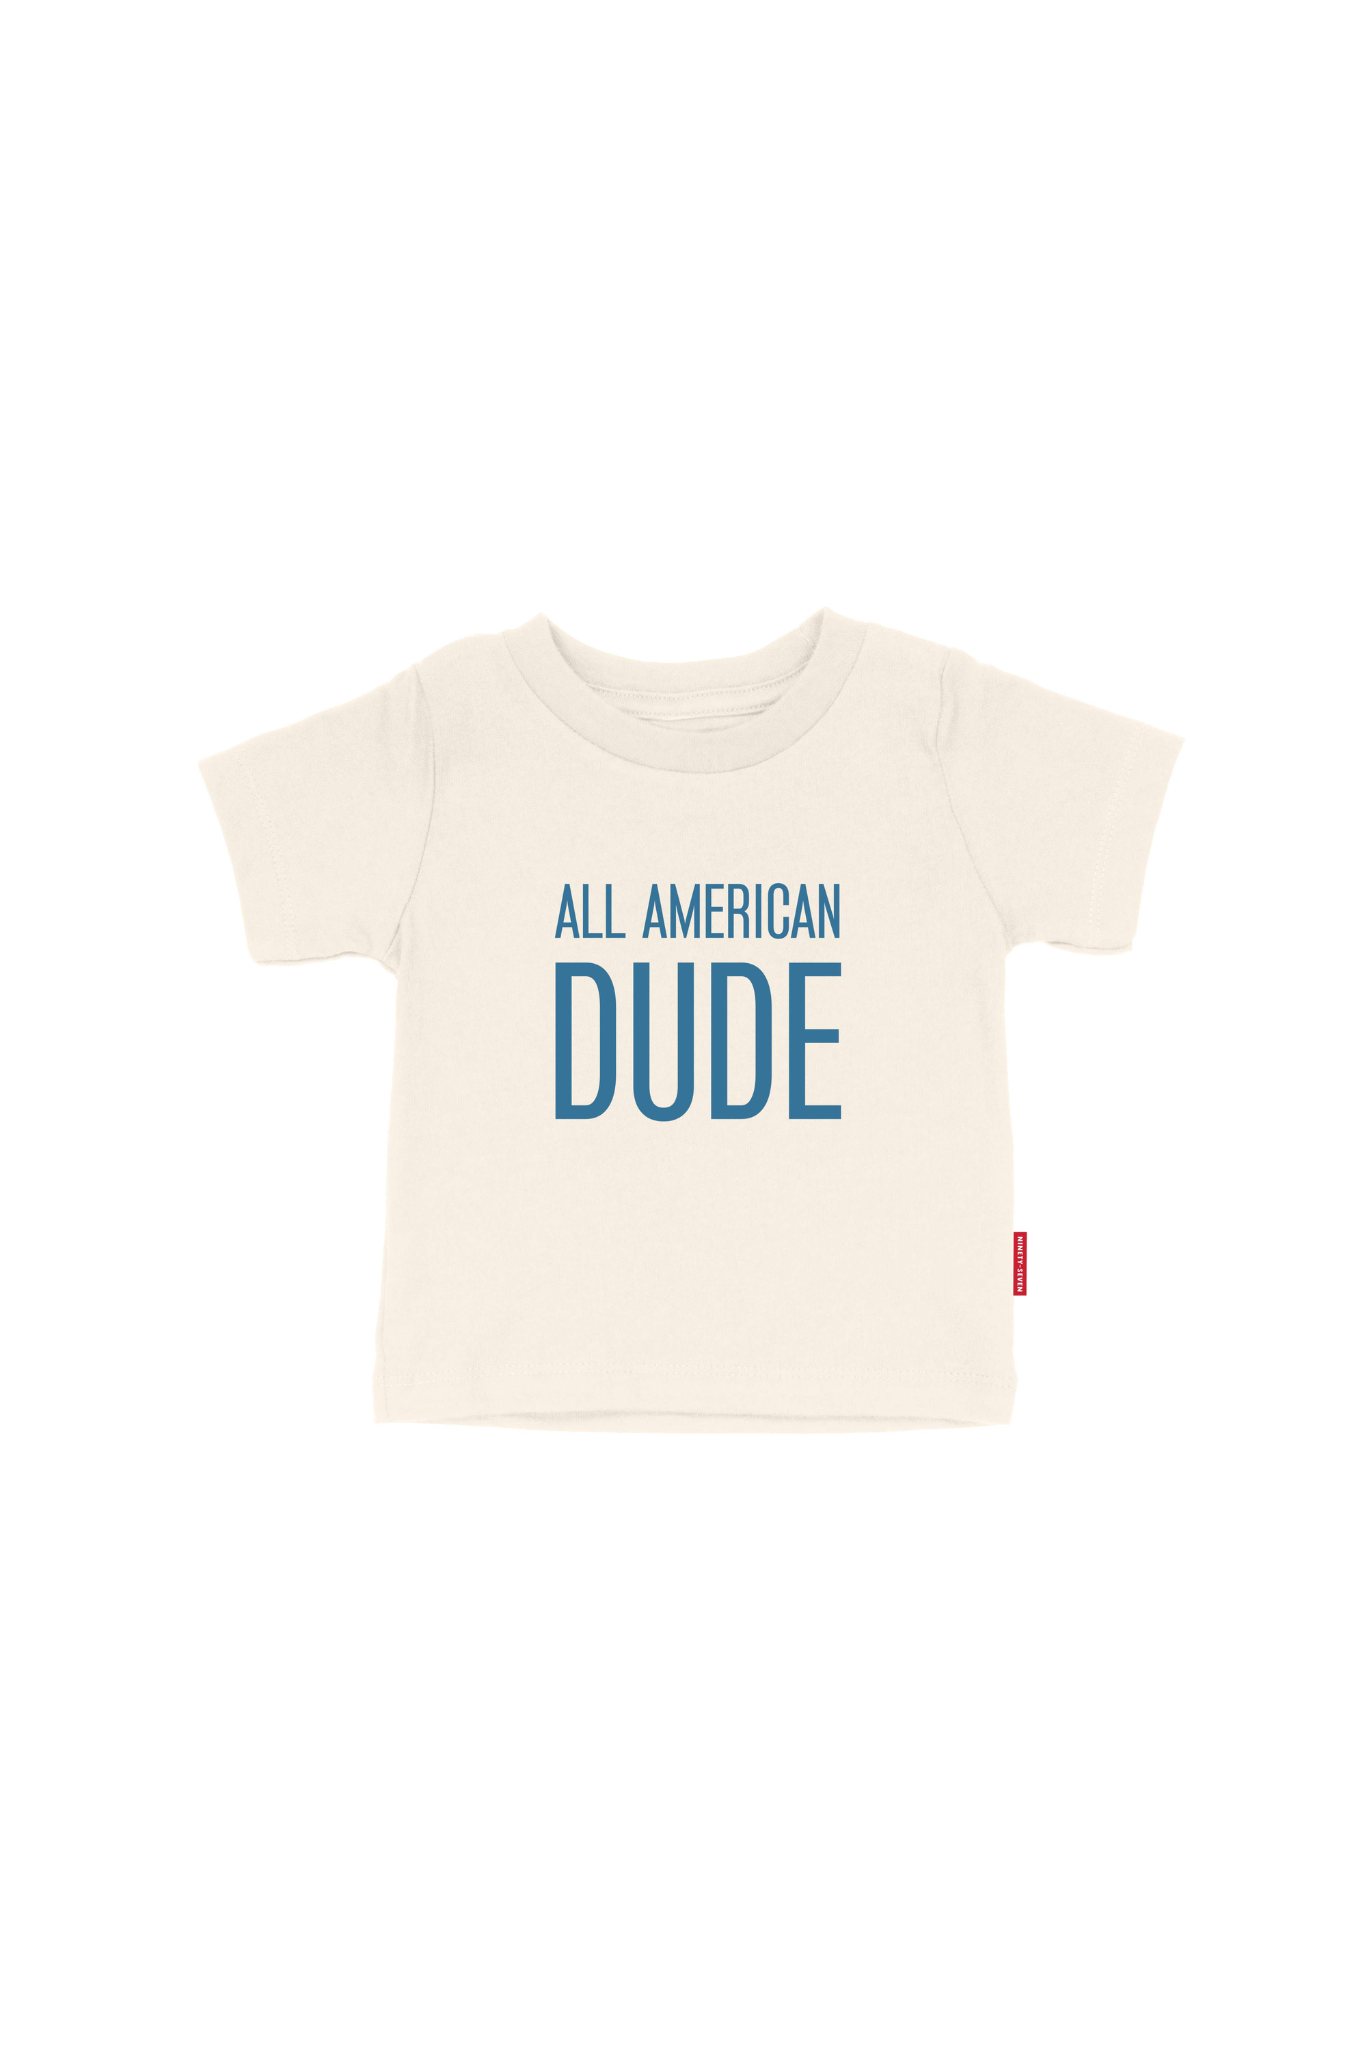 97 Design Co. - All American Dude - Kids T-shirt, 4th of July, Toddler Tee